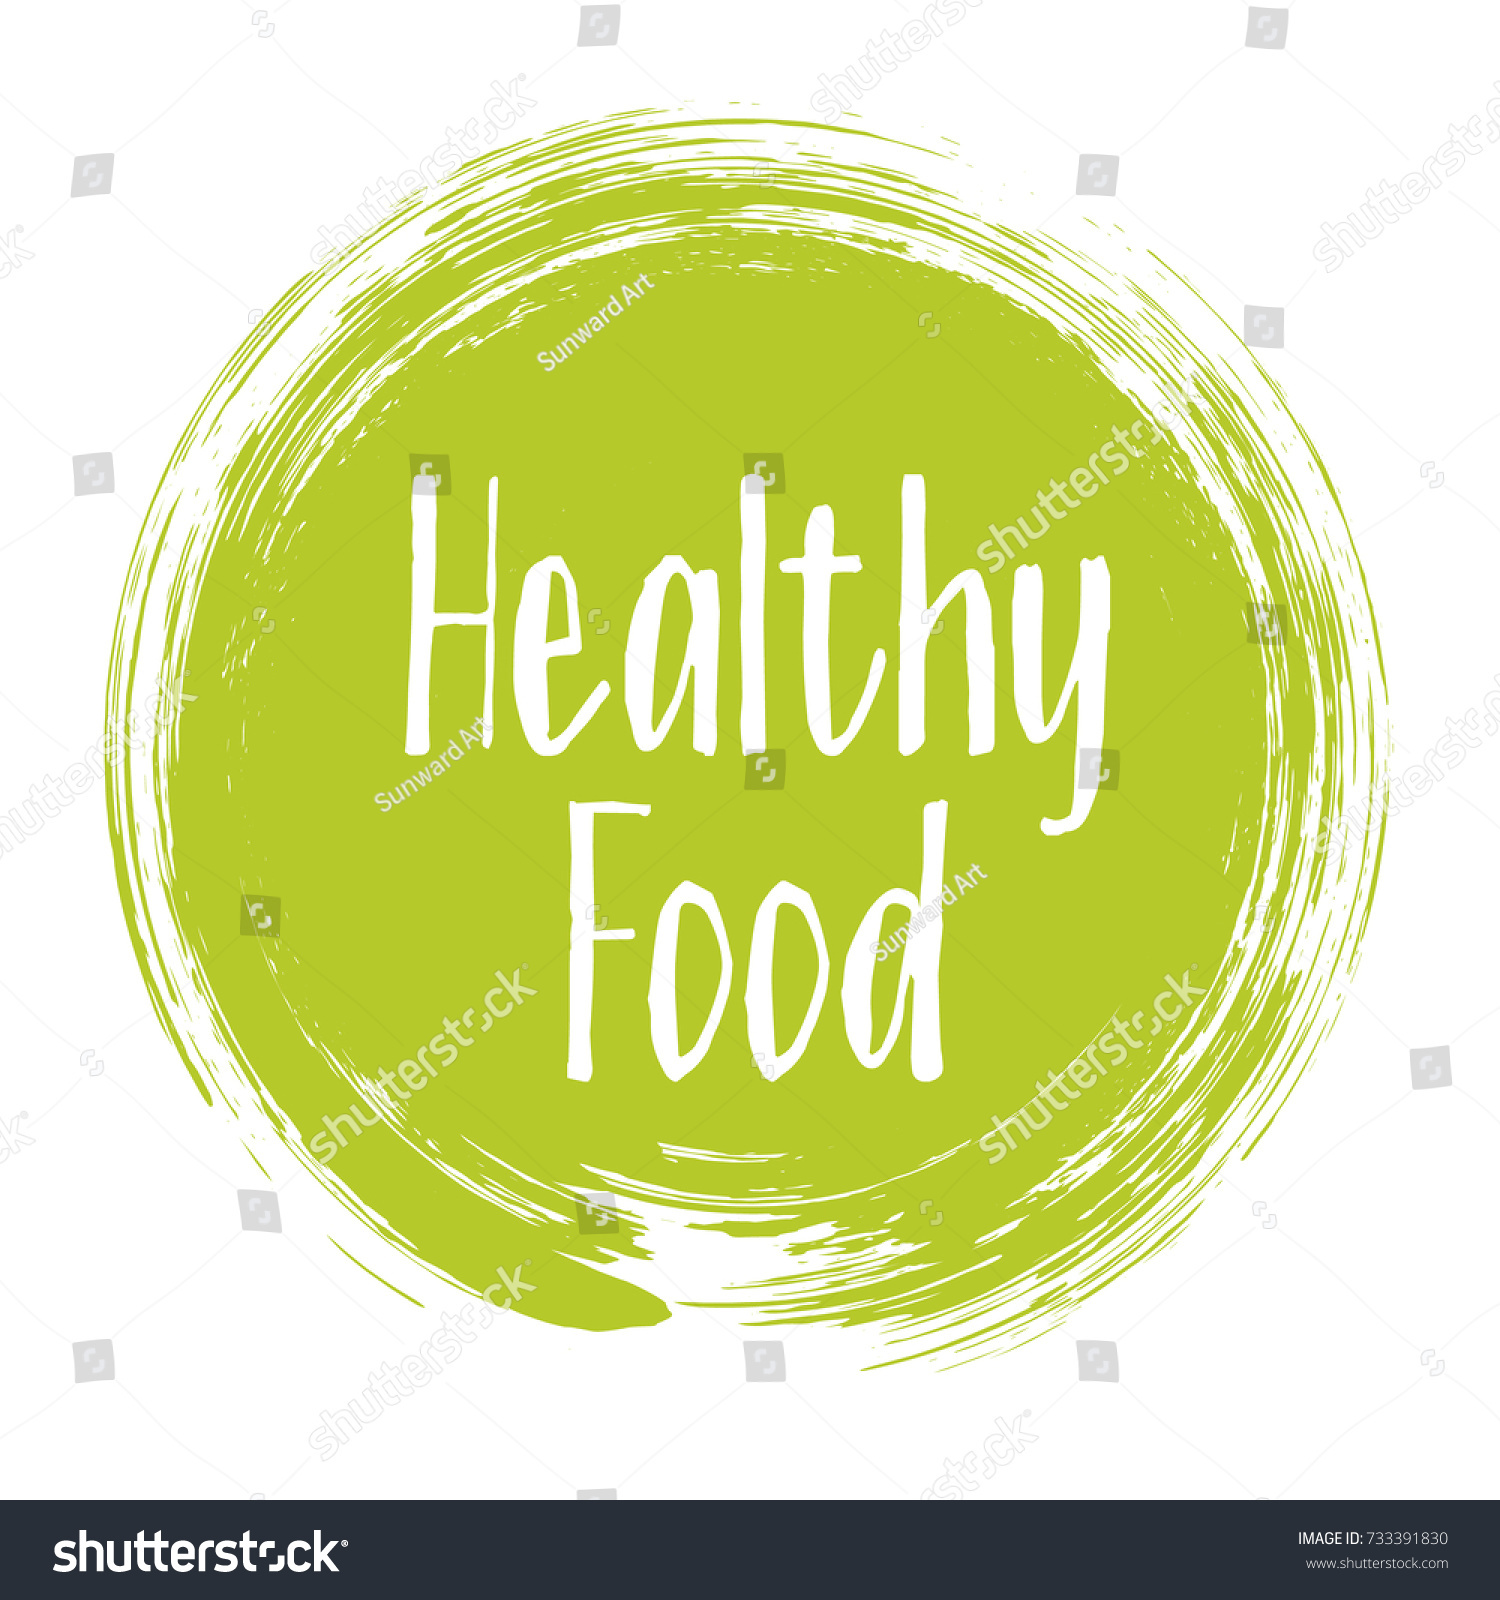 Healthy Food Icon Painted Label Vector Stock Vector (Royalty Free ...